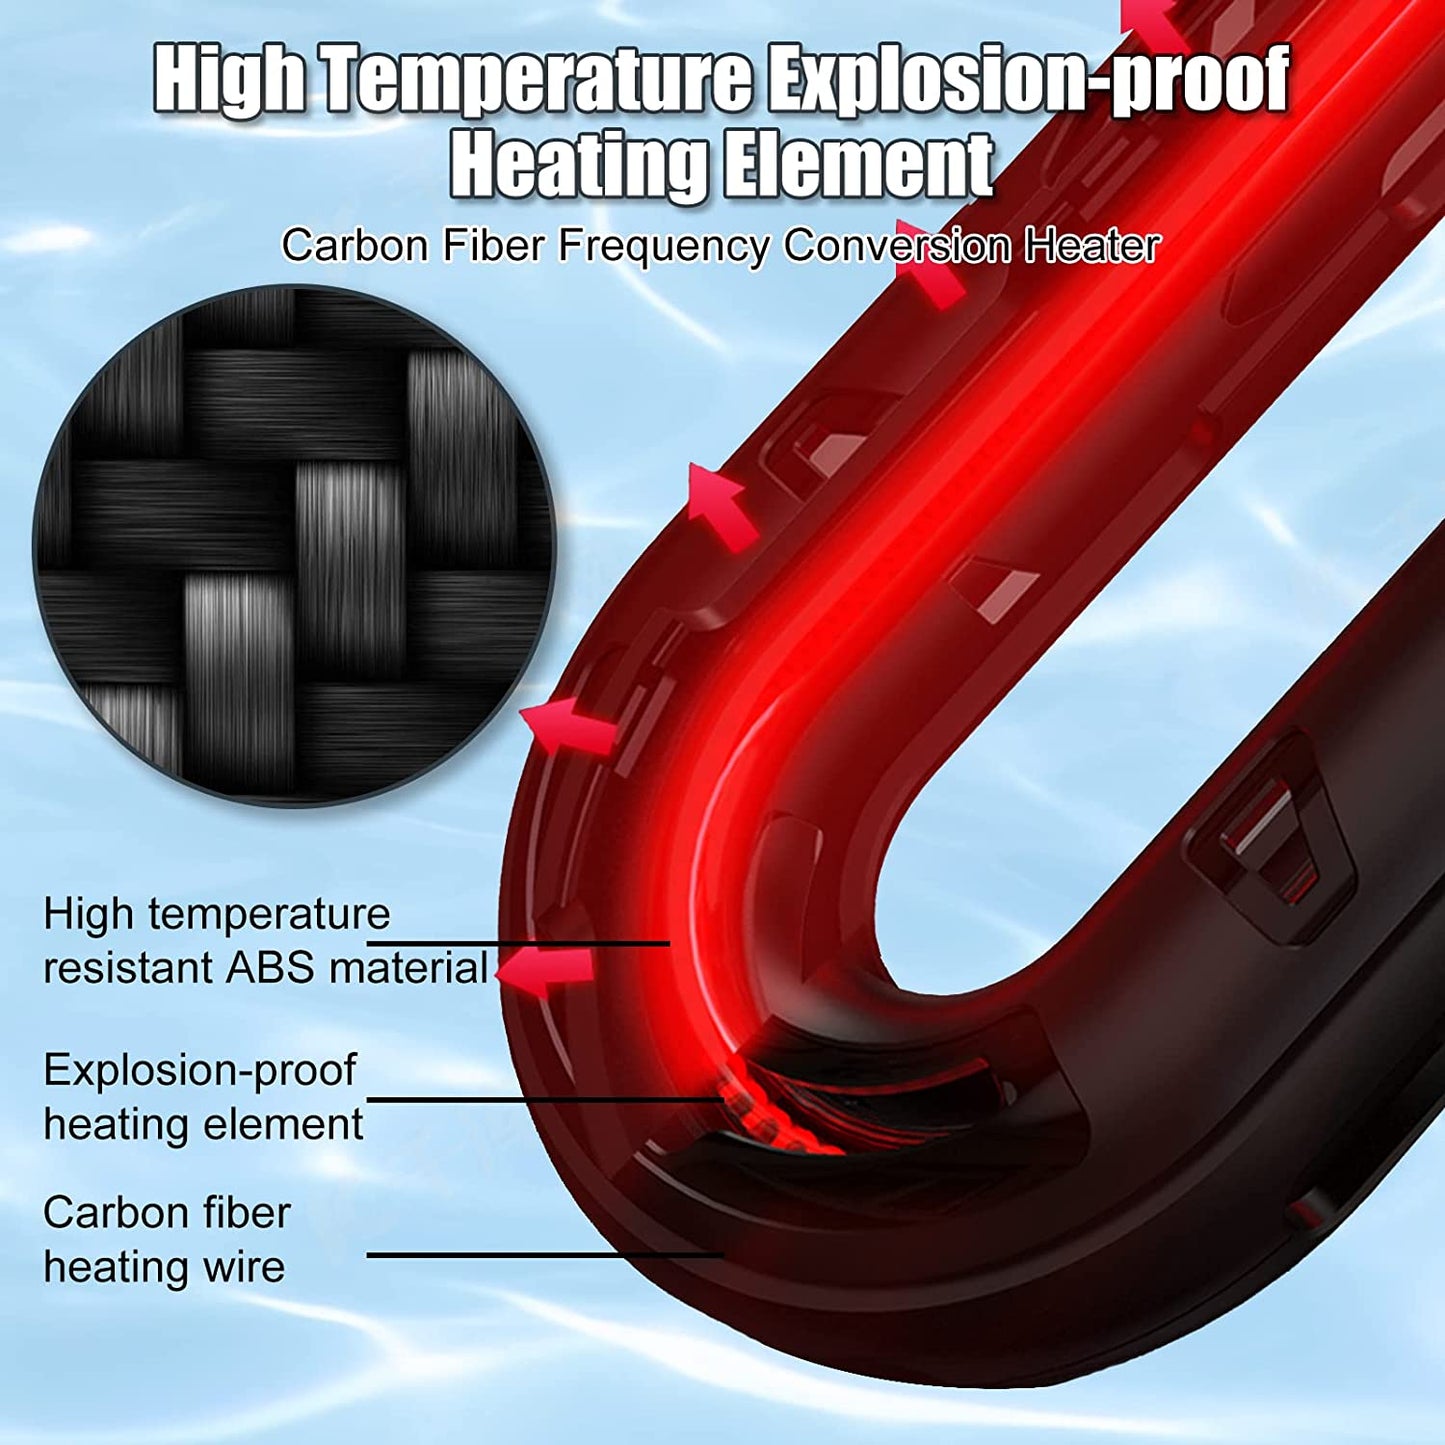 High temperature explosion-proof heating element